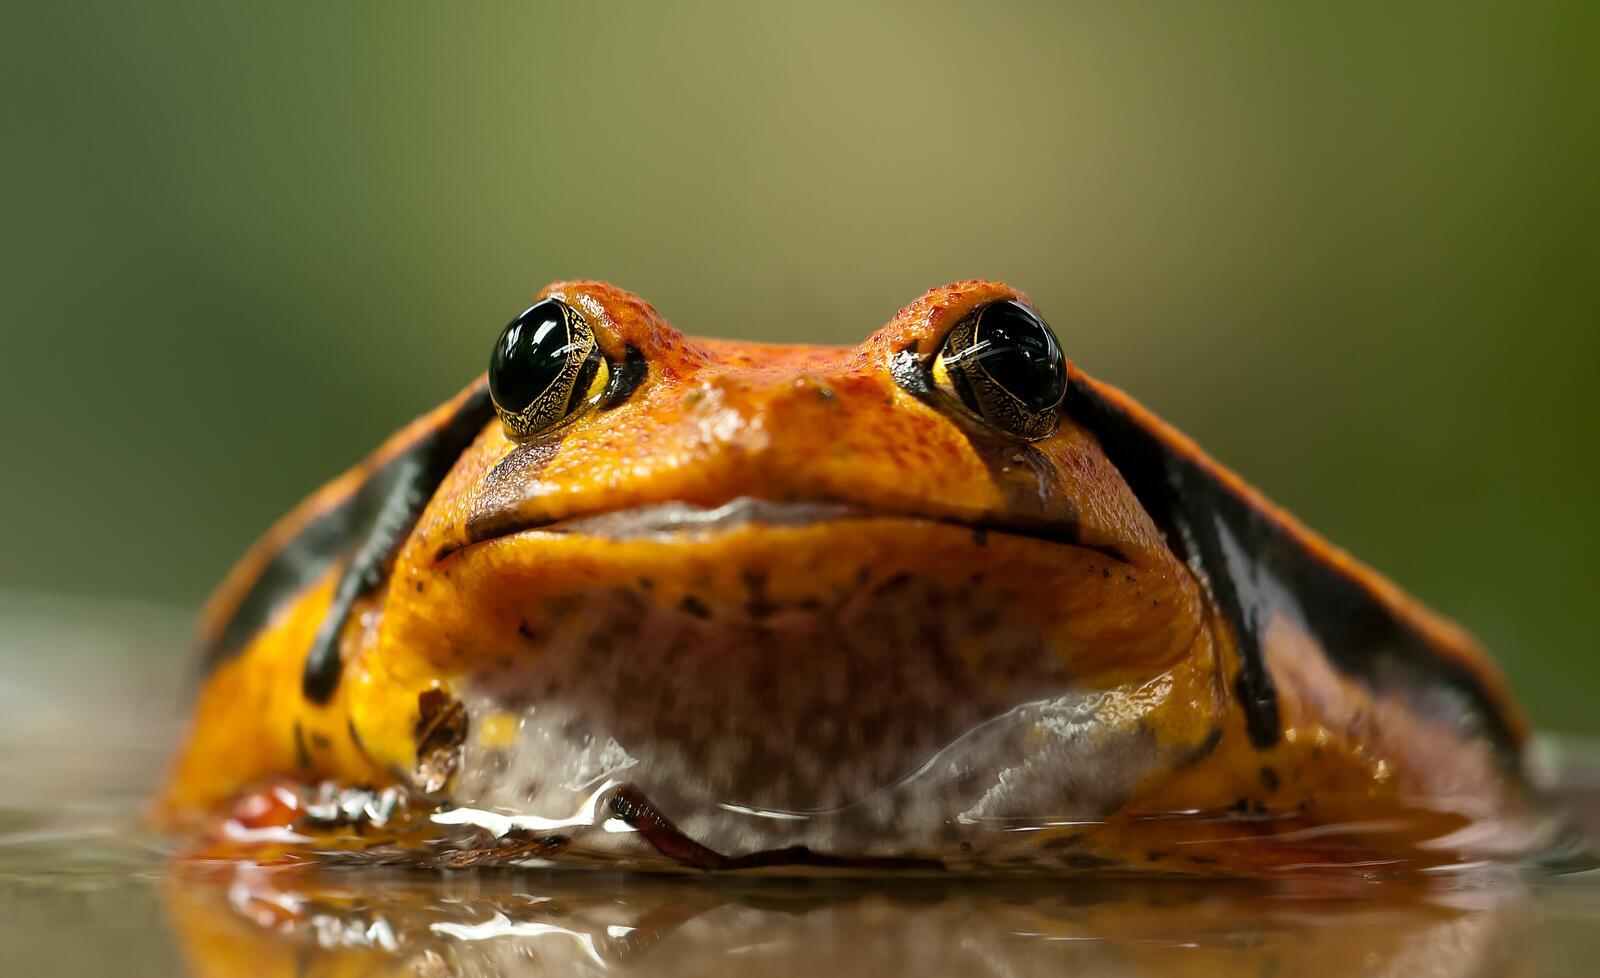 Free photo Orange toad in the water